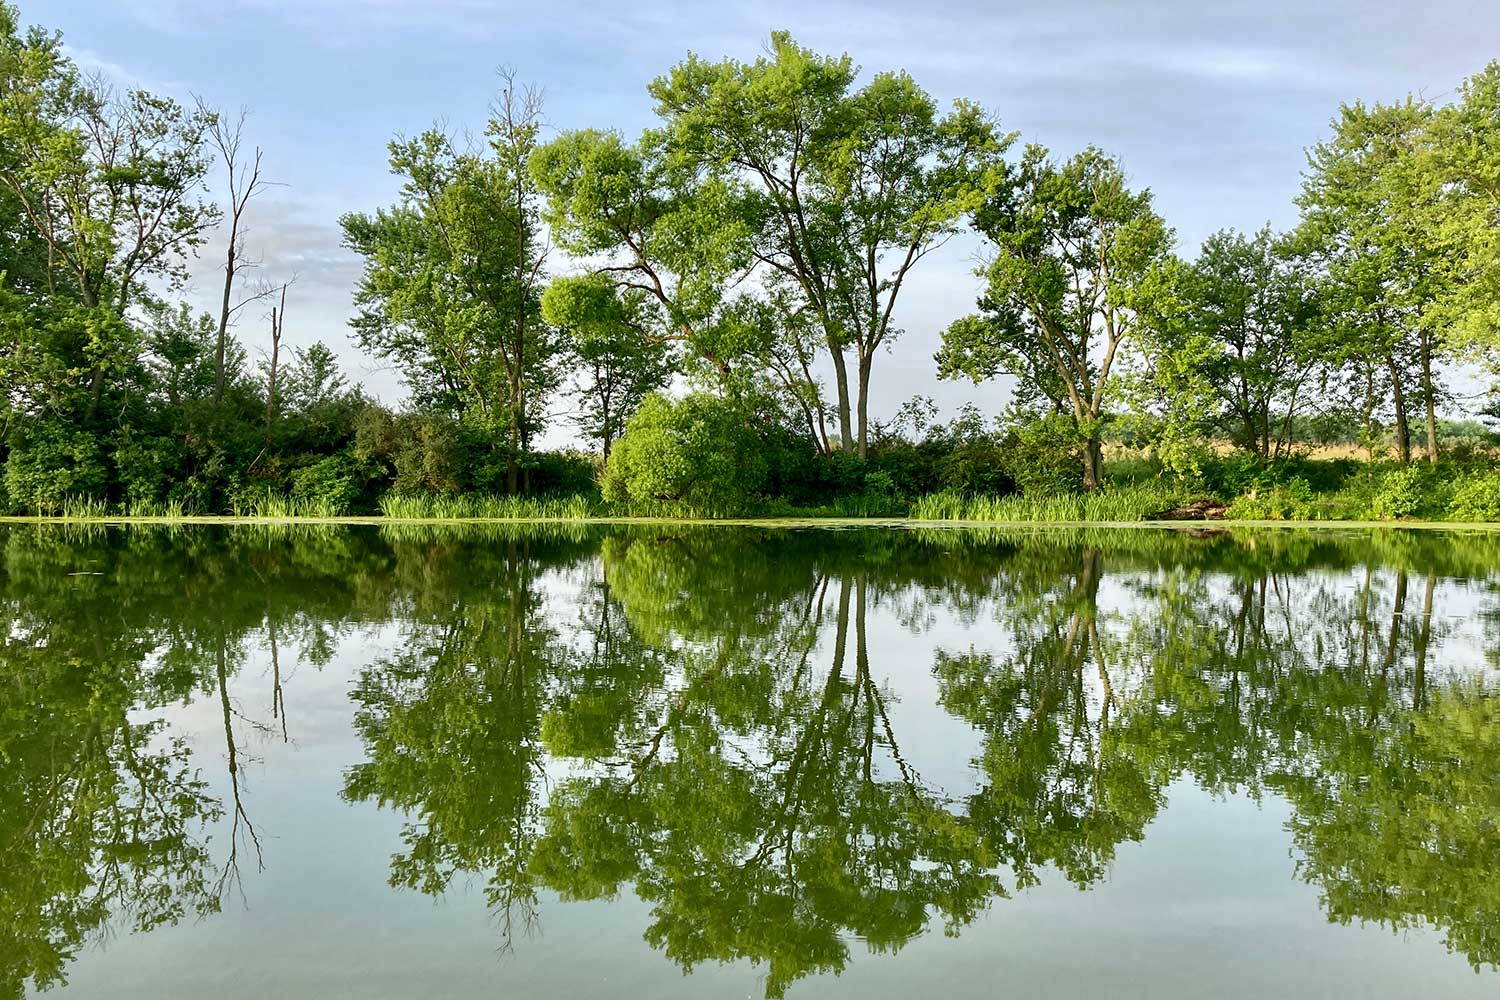 Large leaf-filled trees along a shoreline reflected in the calm water below.